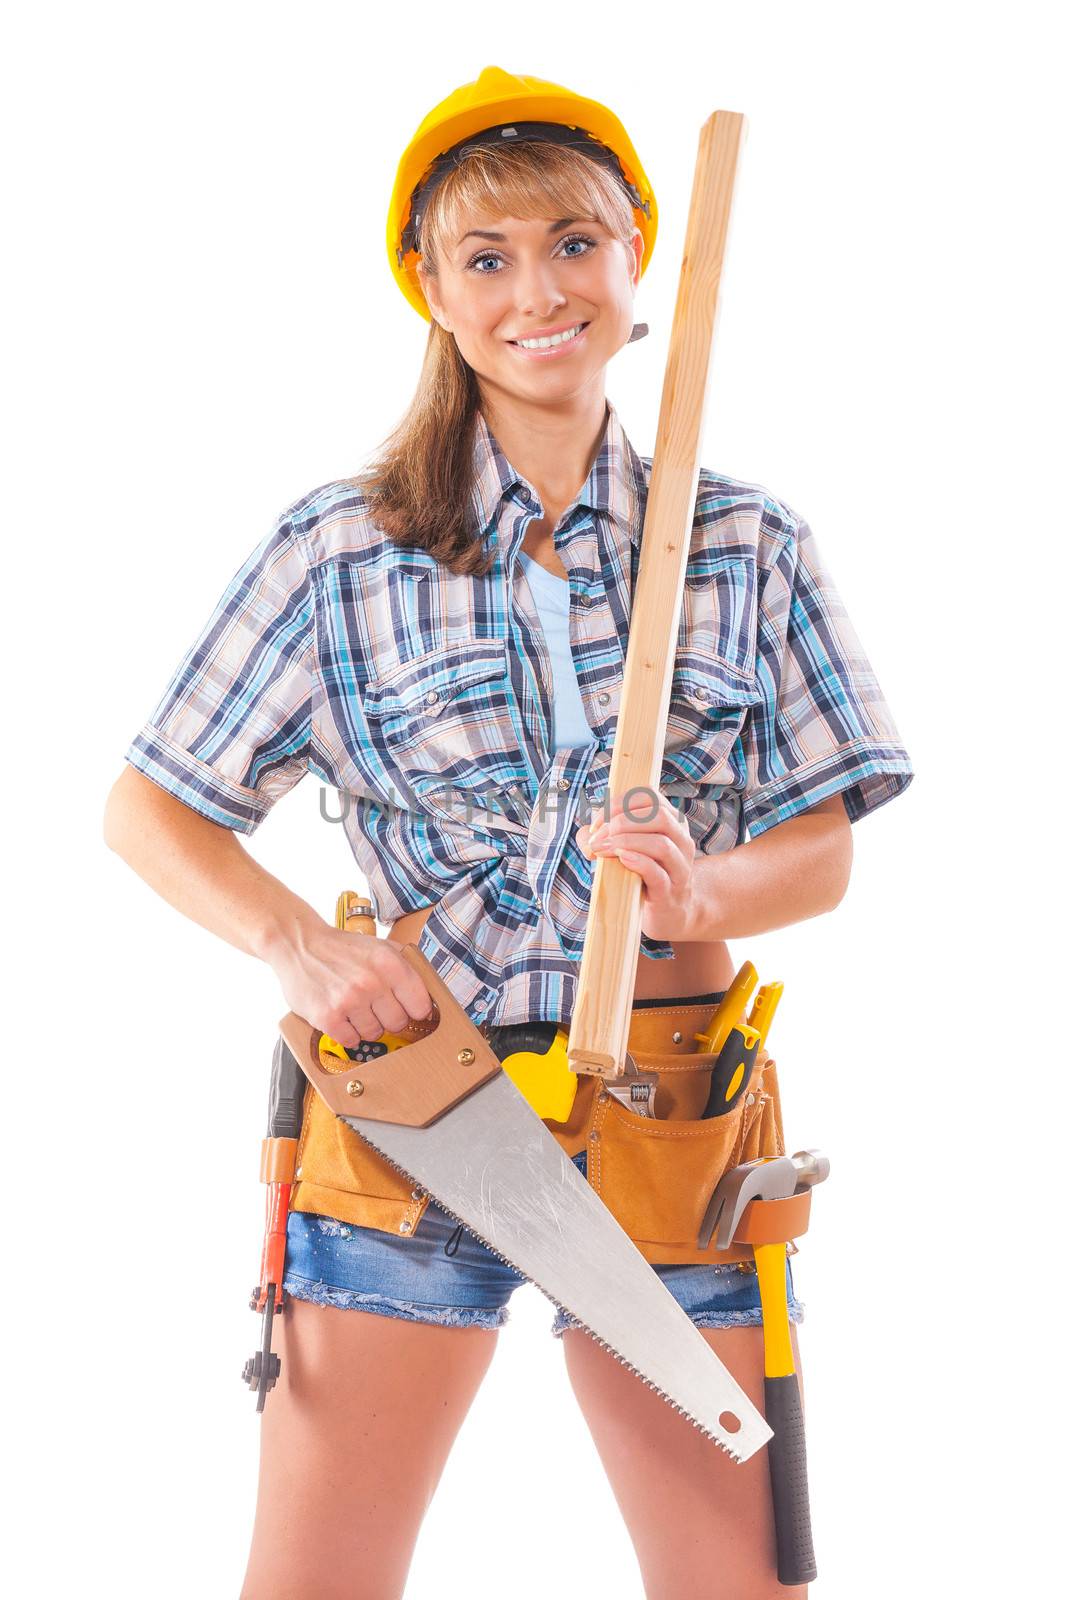 sexy female worker with carpenter tools isolated on white background